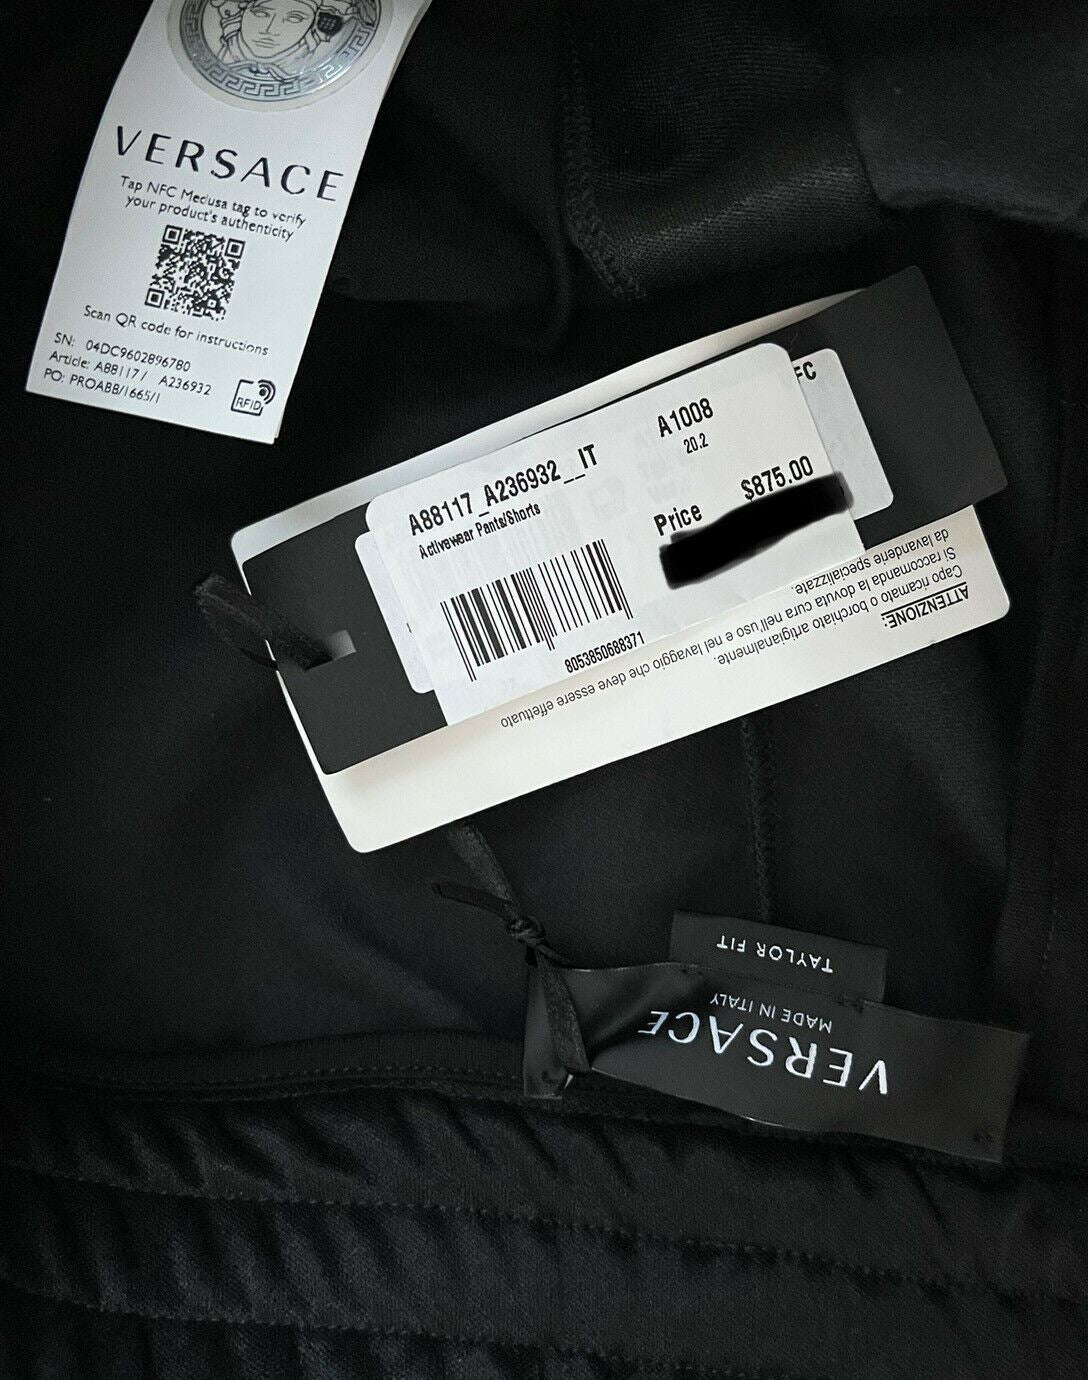 NWT $875 Versace Mens Black Tailor Fit Activewear Pants 3XL Made in Italy A88117